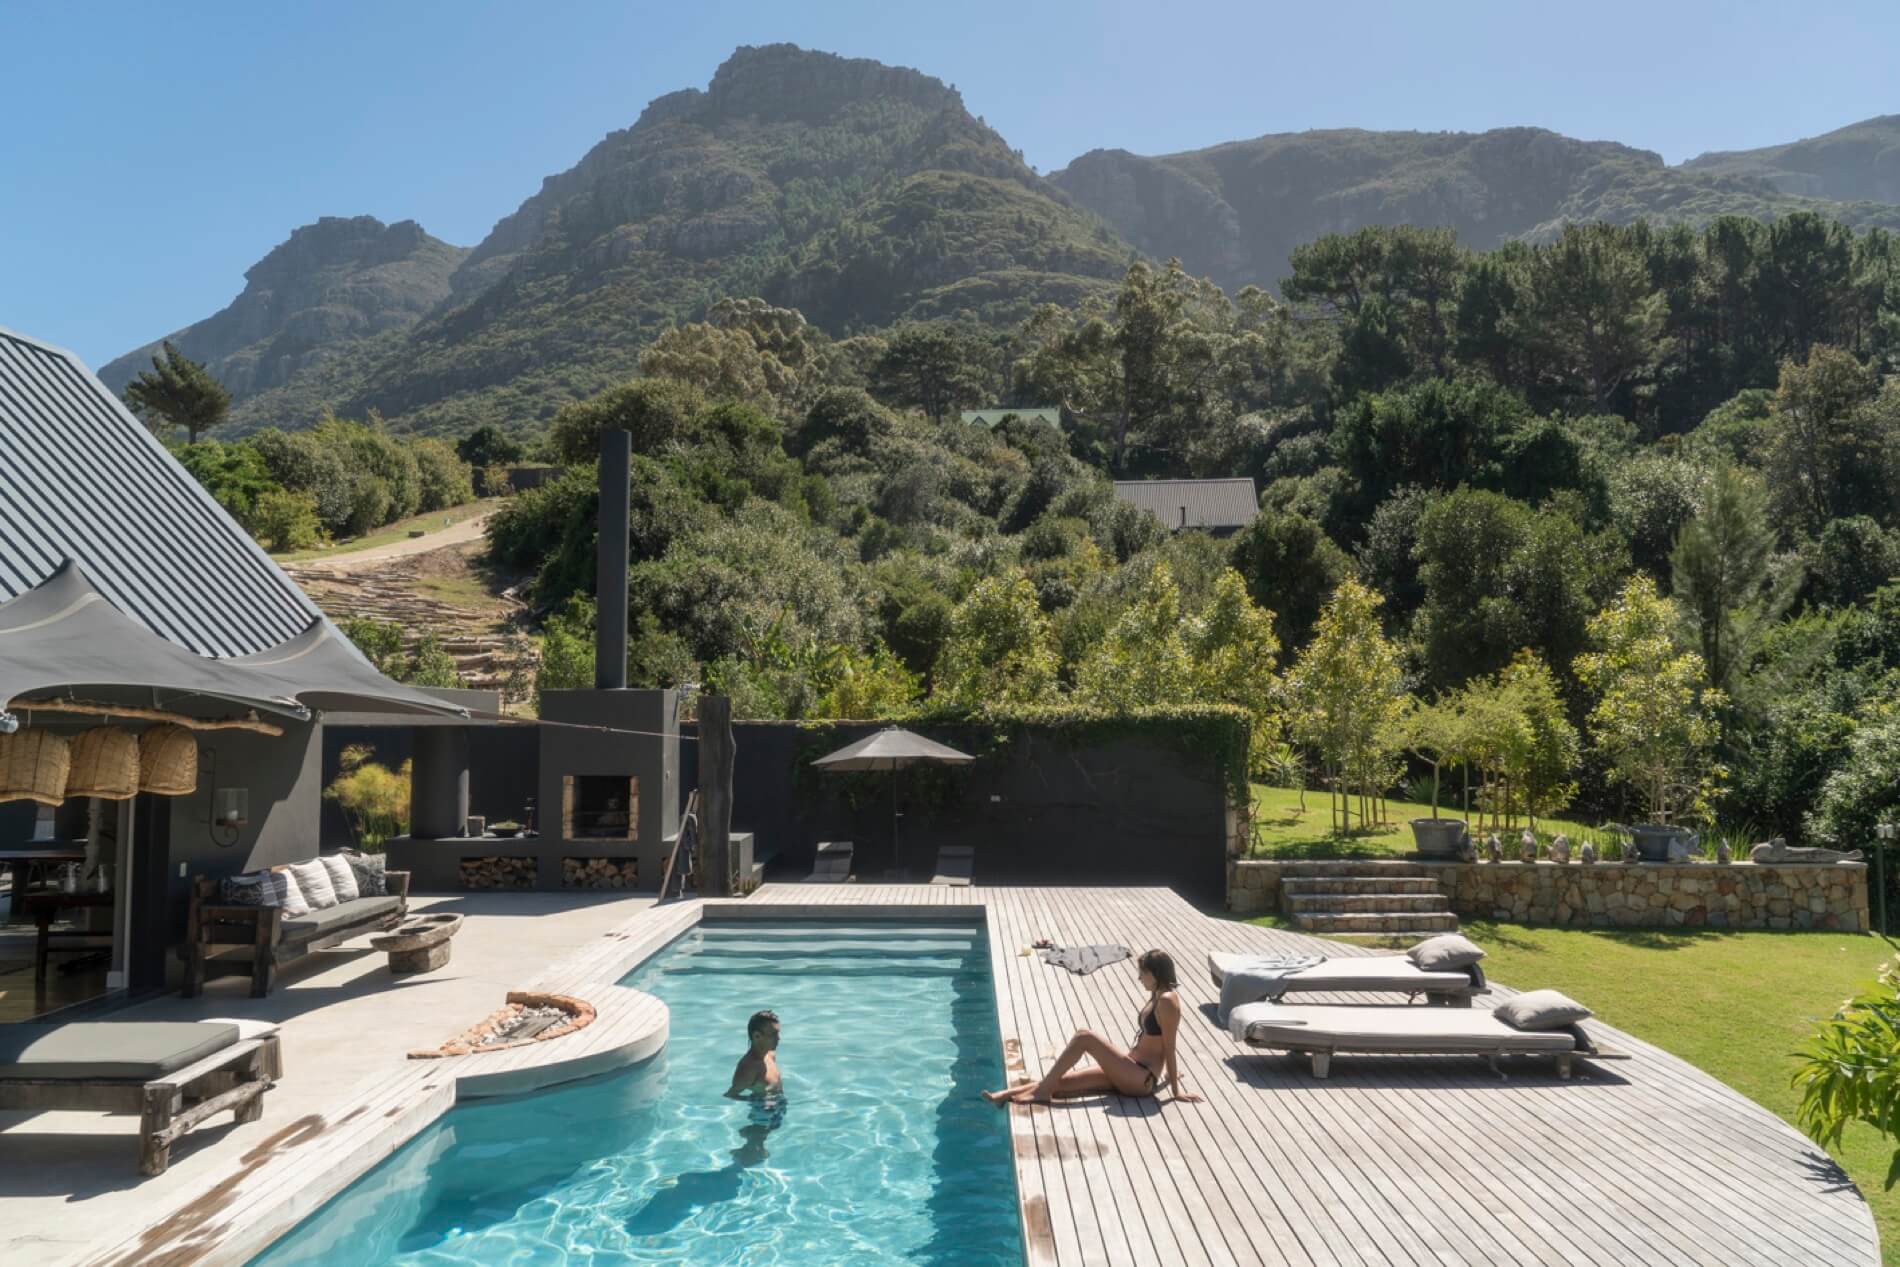 Photo 16 of Villa Maison Noir accommodation in Hout Bay, Cape Town with 5 bedrooms and 5 bathrooms